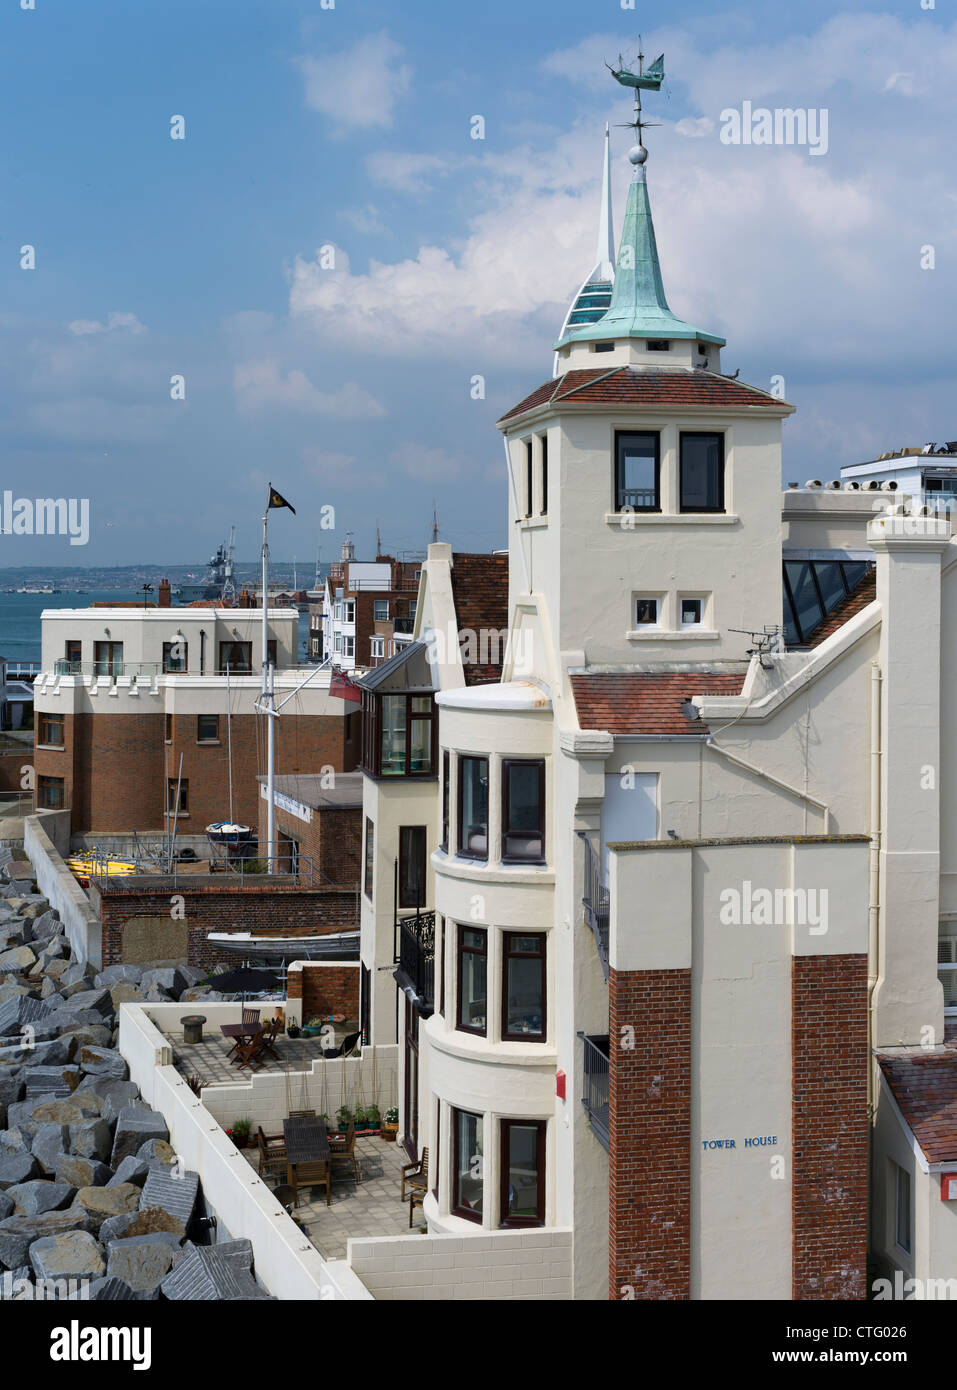 dh Old Portsmouth PORTSMOUTH HAMPSHIRE Naval house architecture building Harbour area Apartments Apartment uk Luxury Modern Homes Housing england Foto Stock